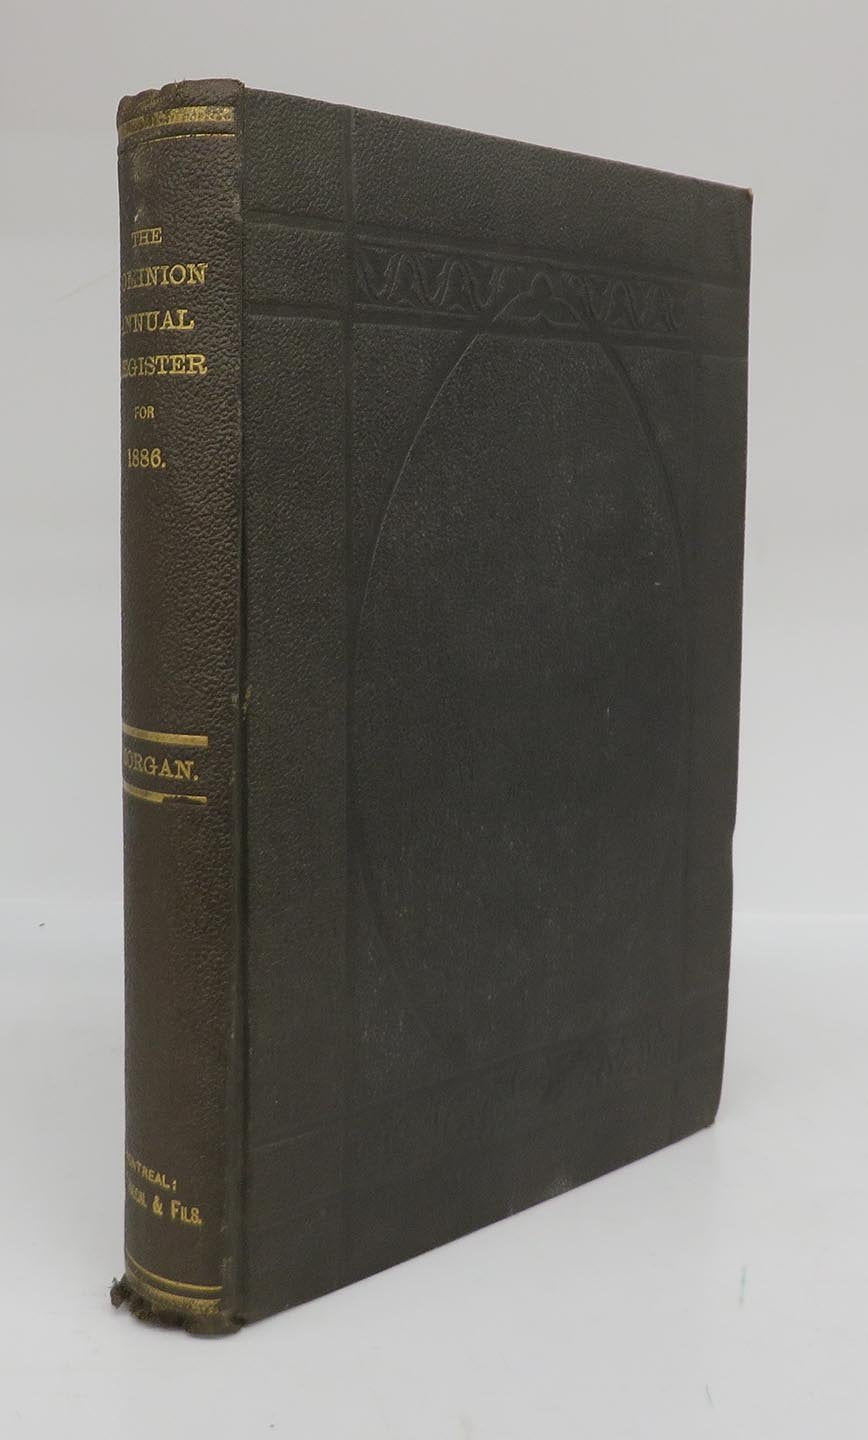 The Dominion Annual Register and Review for the Twentieth Year of the Canadian Union 1886